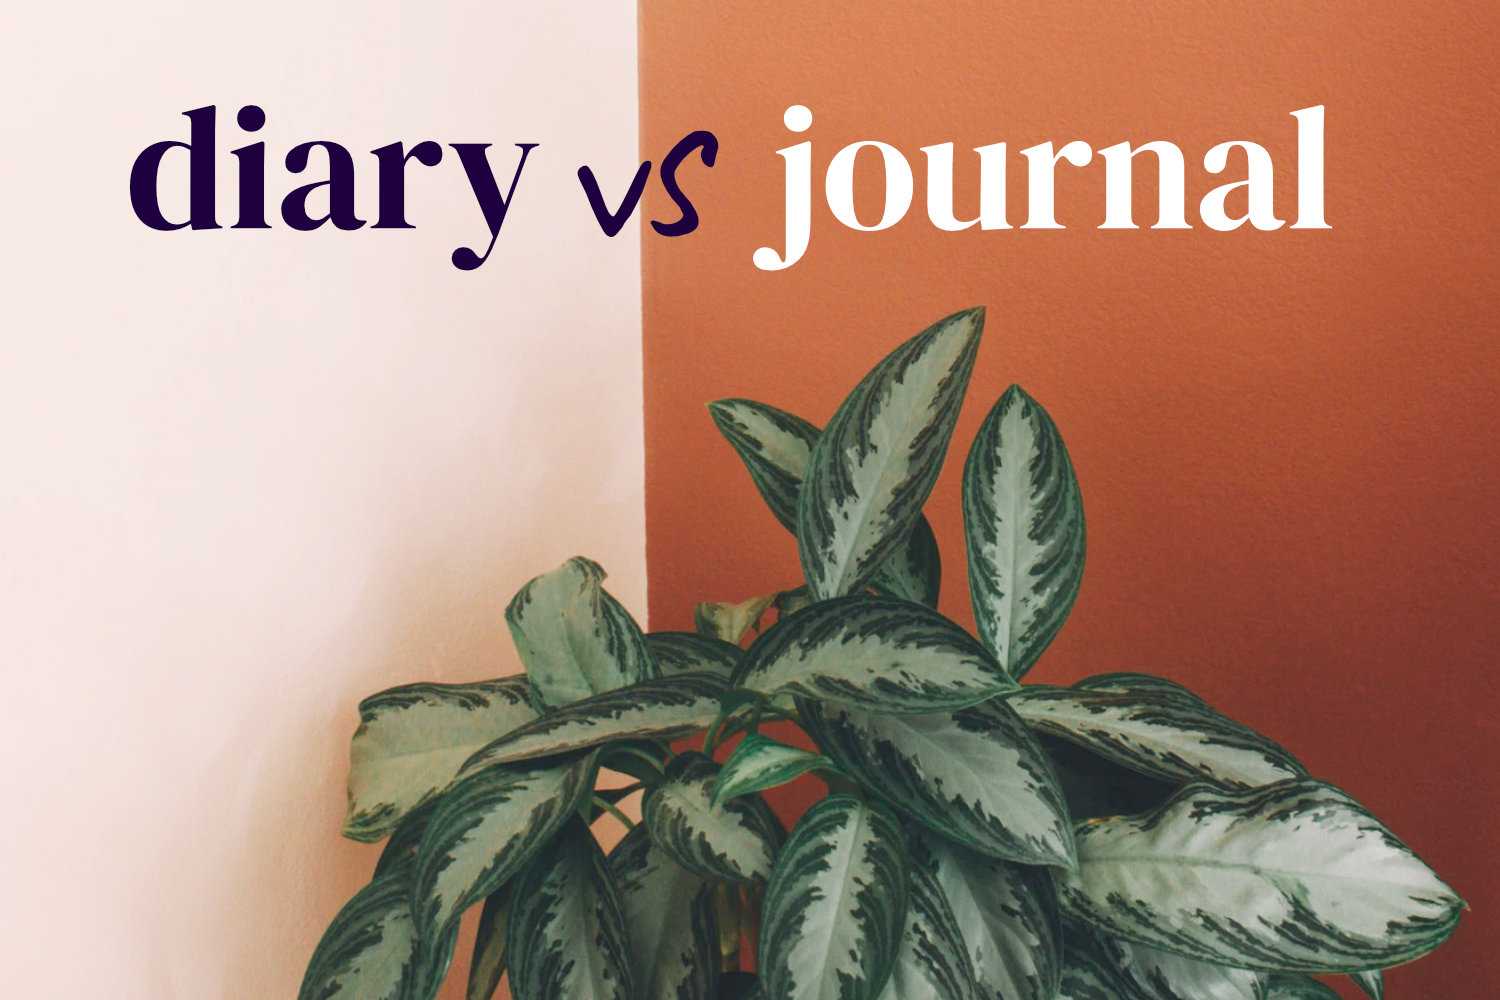 Diary vs. Journal: Which Is Right for You?